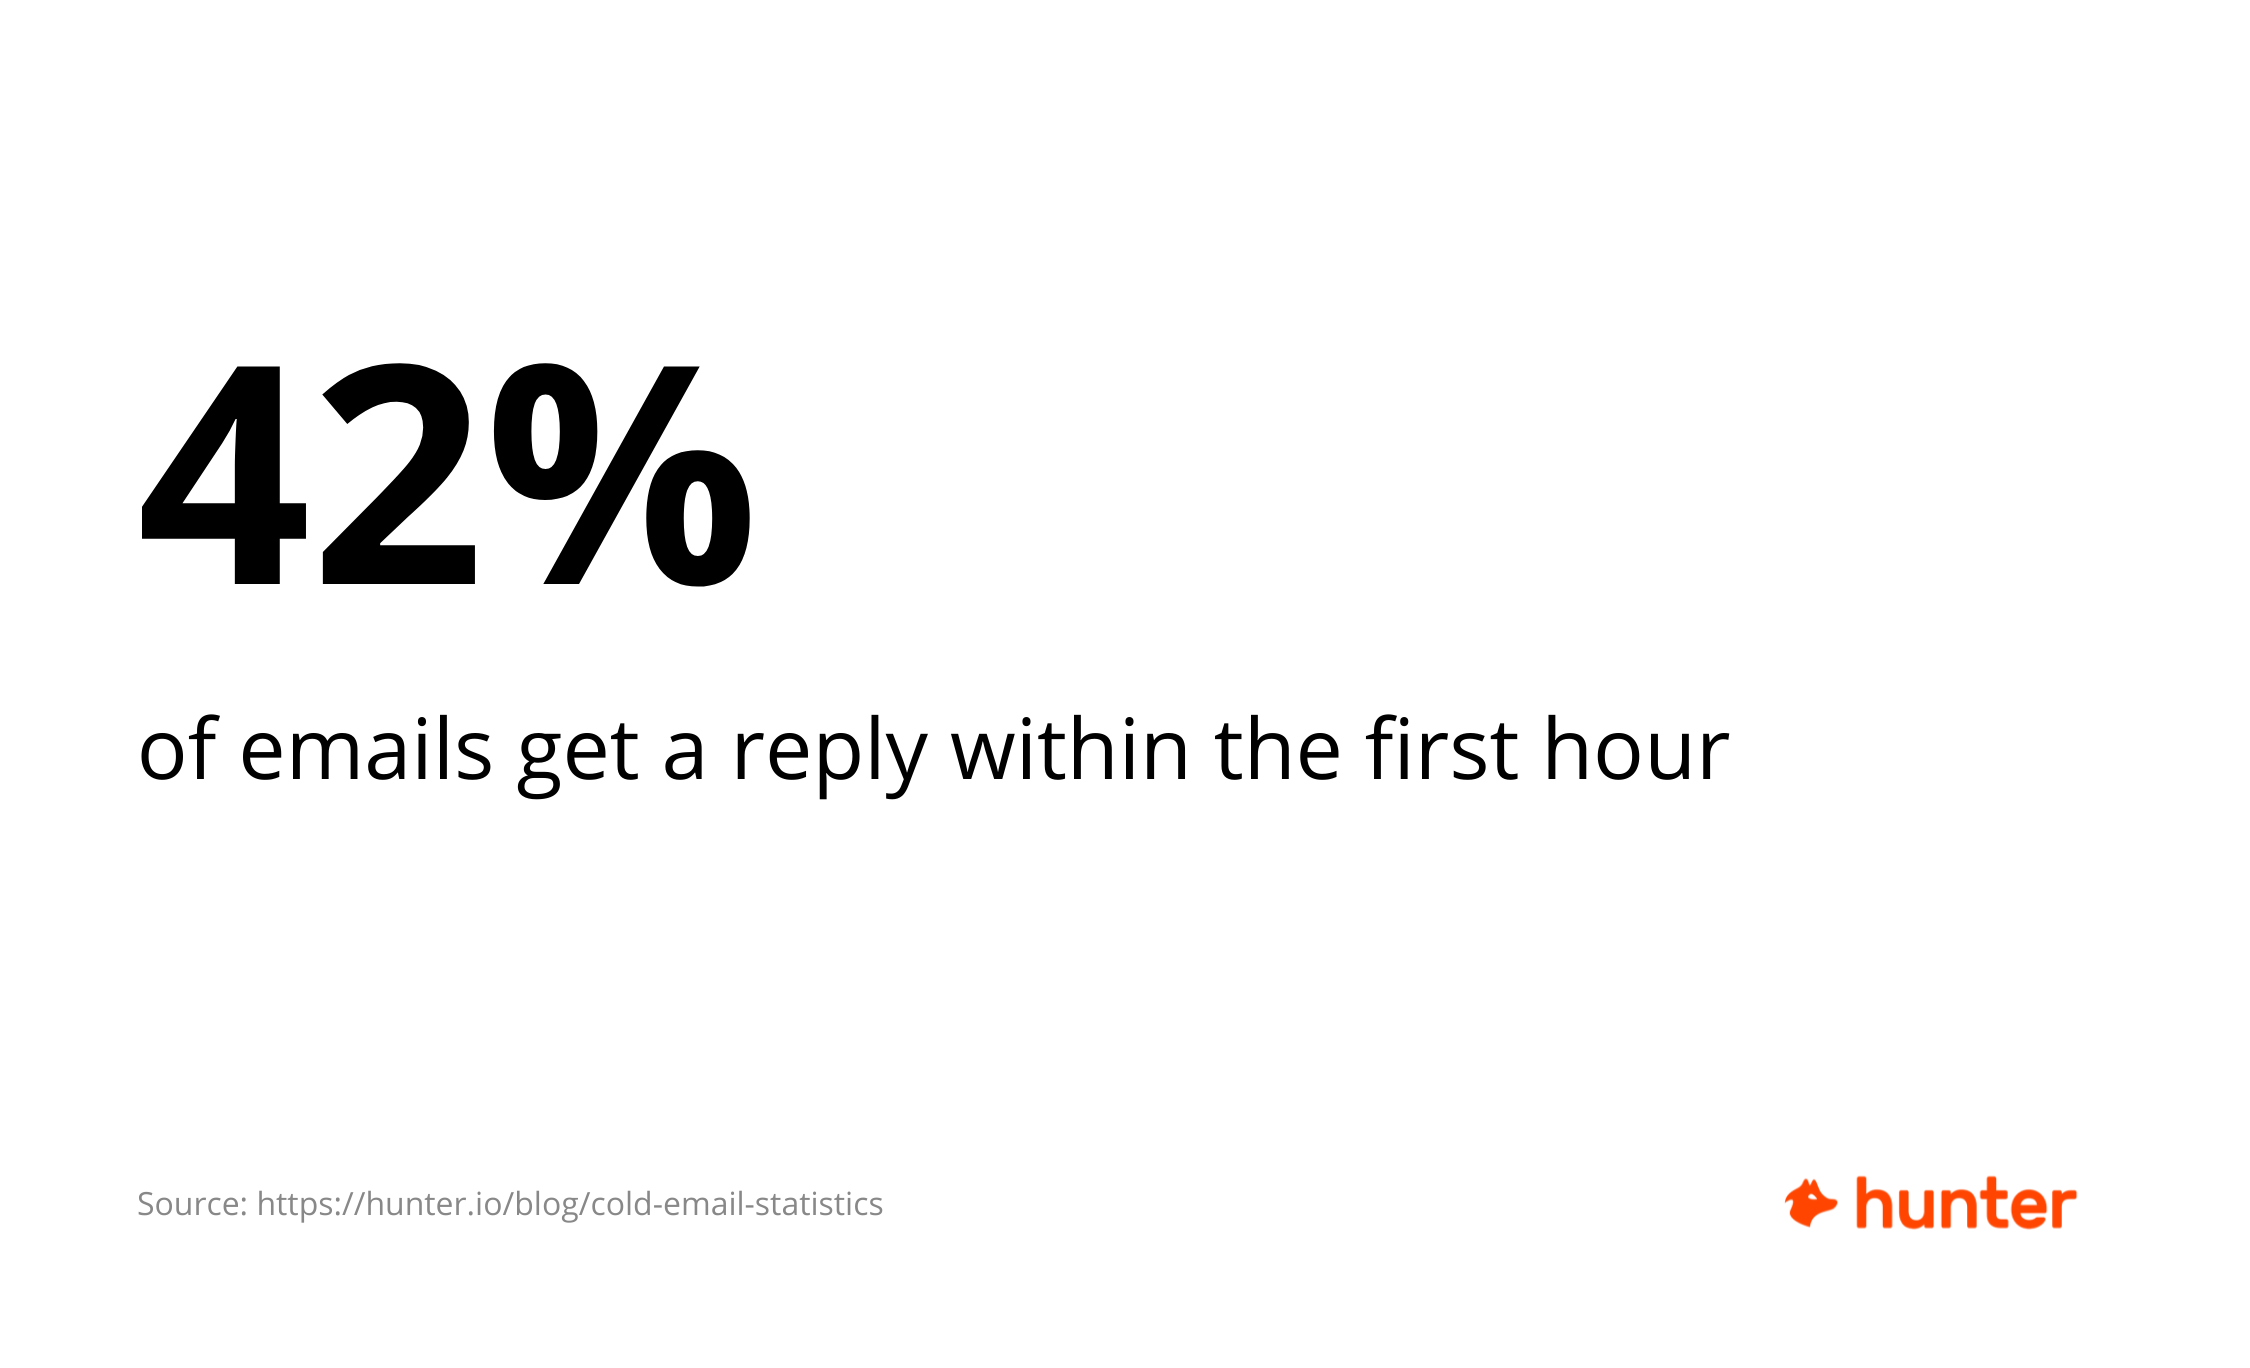 42% of emails get a reply within the first hour